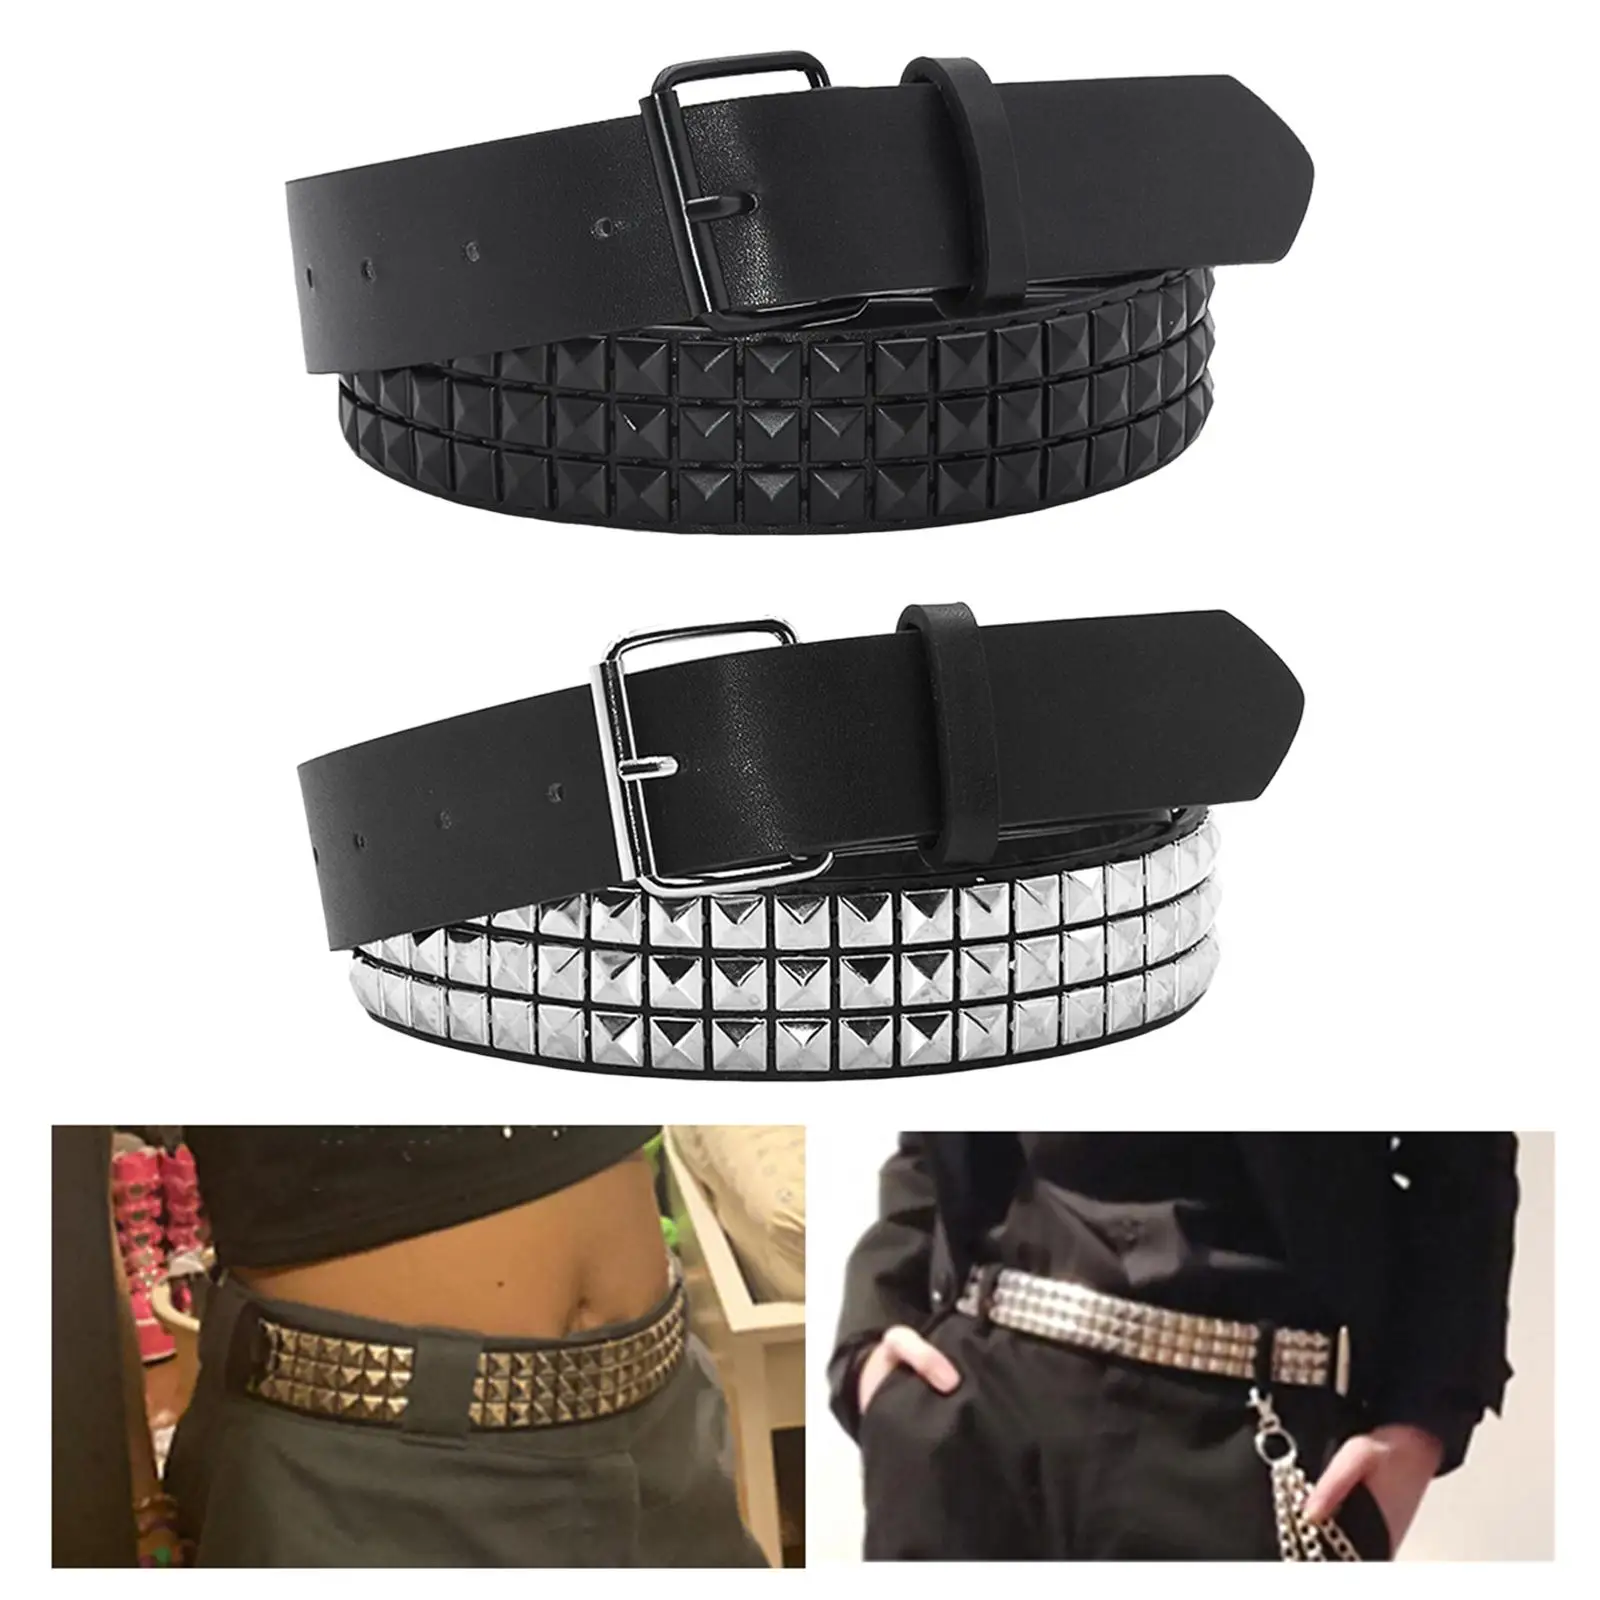 Studded leather belt with pin buckle fashion punk belt jeans accessories